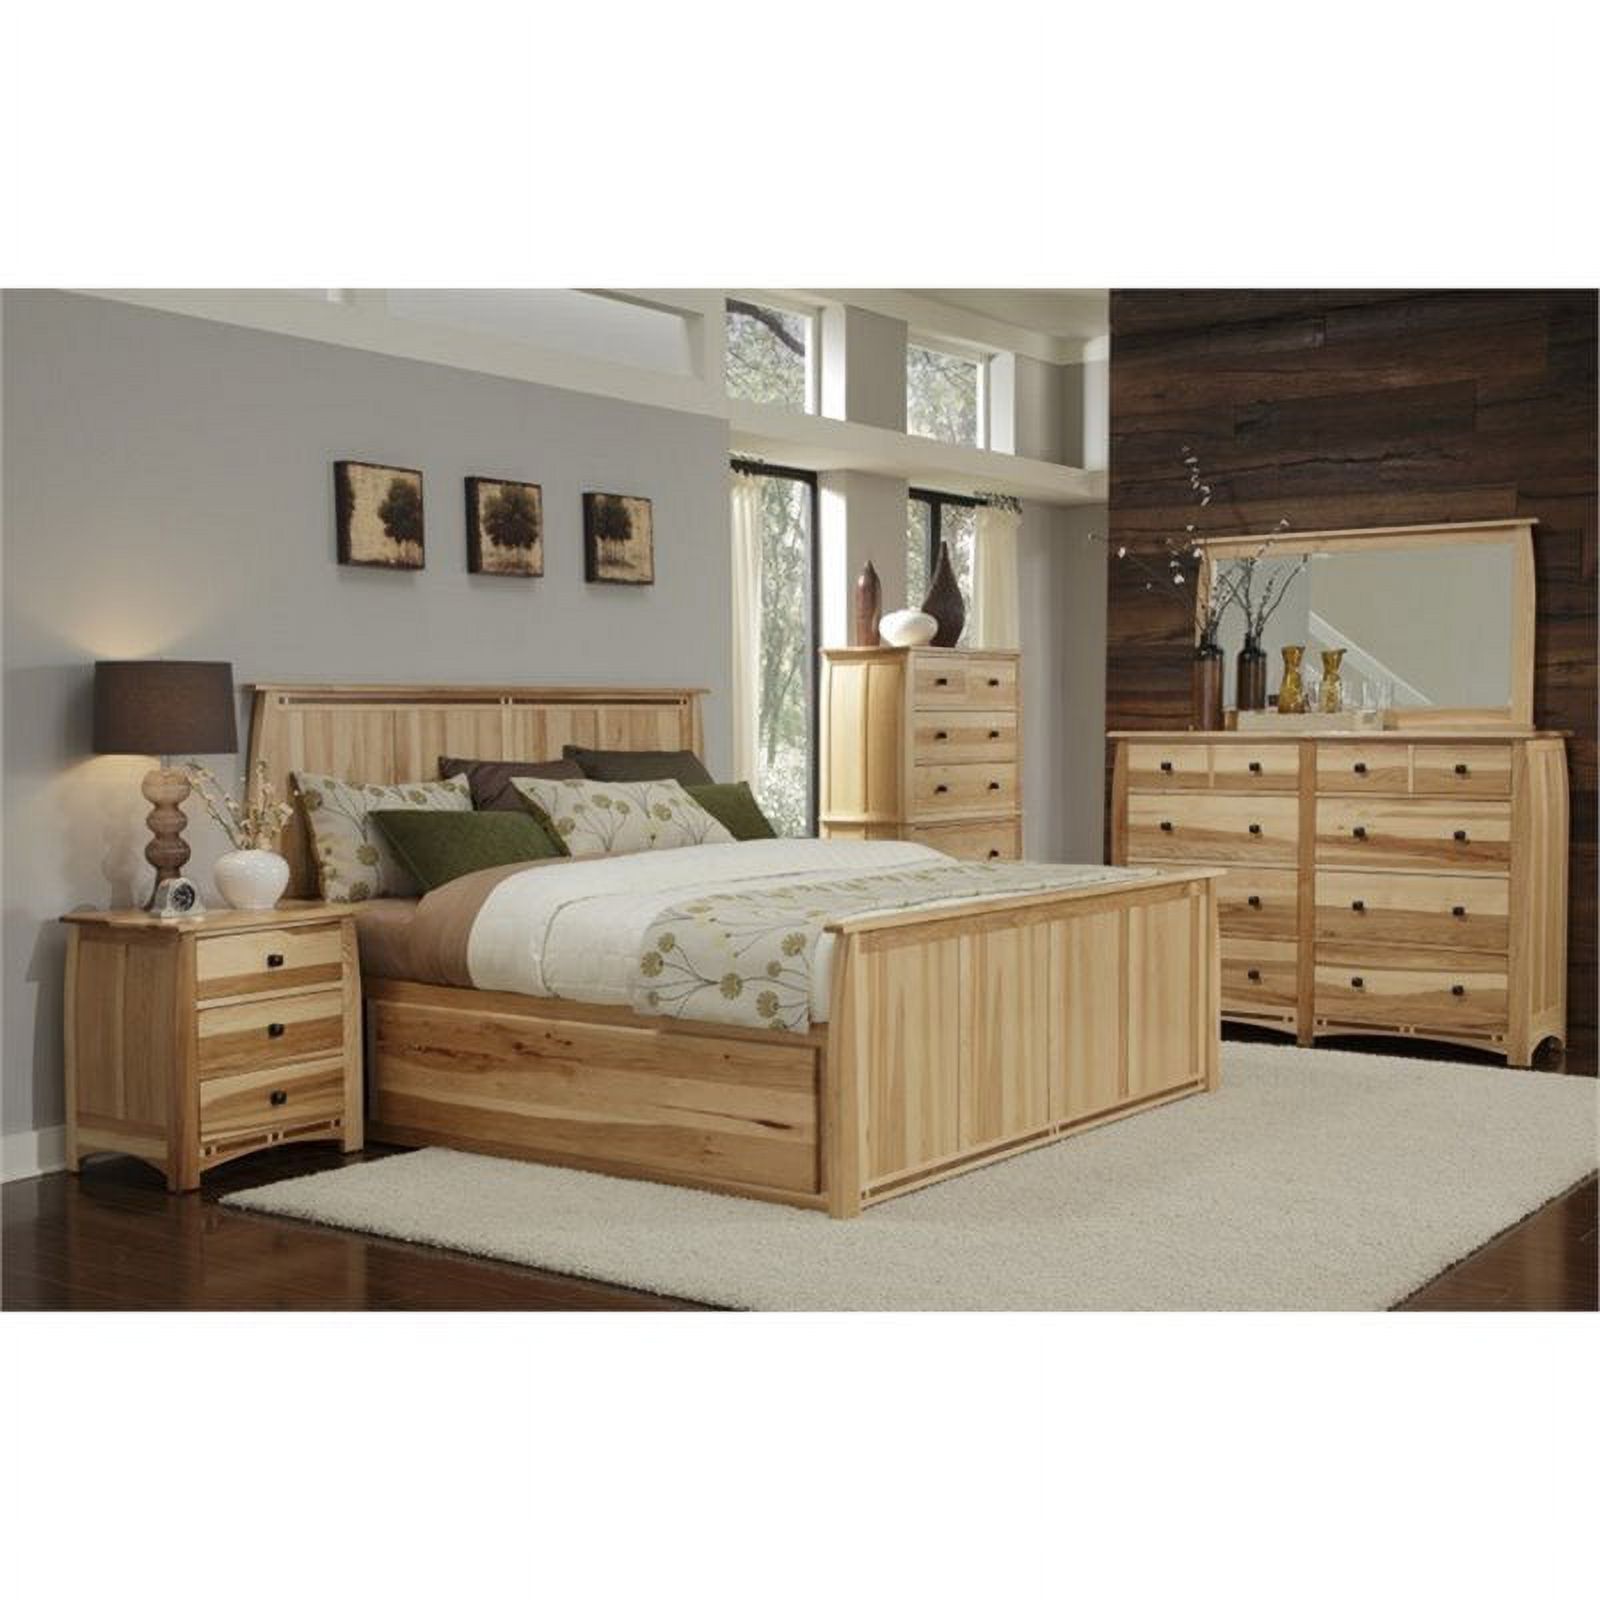 A-America Adamstown Queen Storage Bed in Natural - image 4 of 4